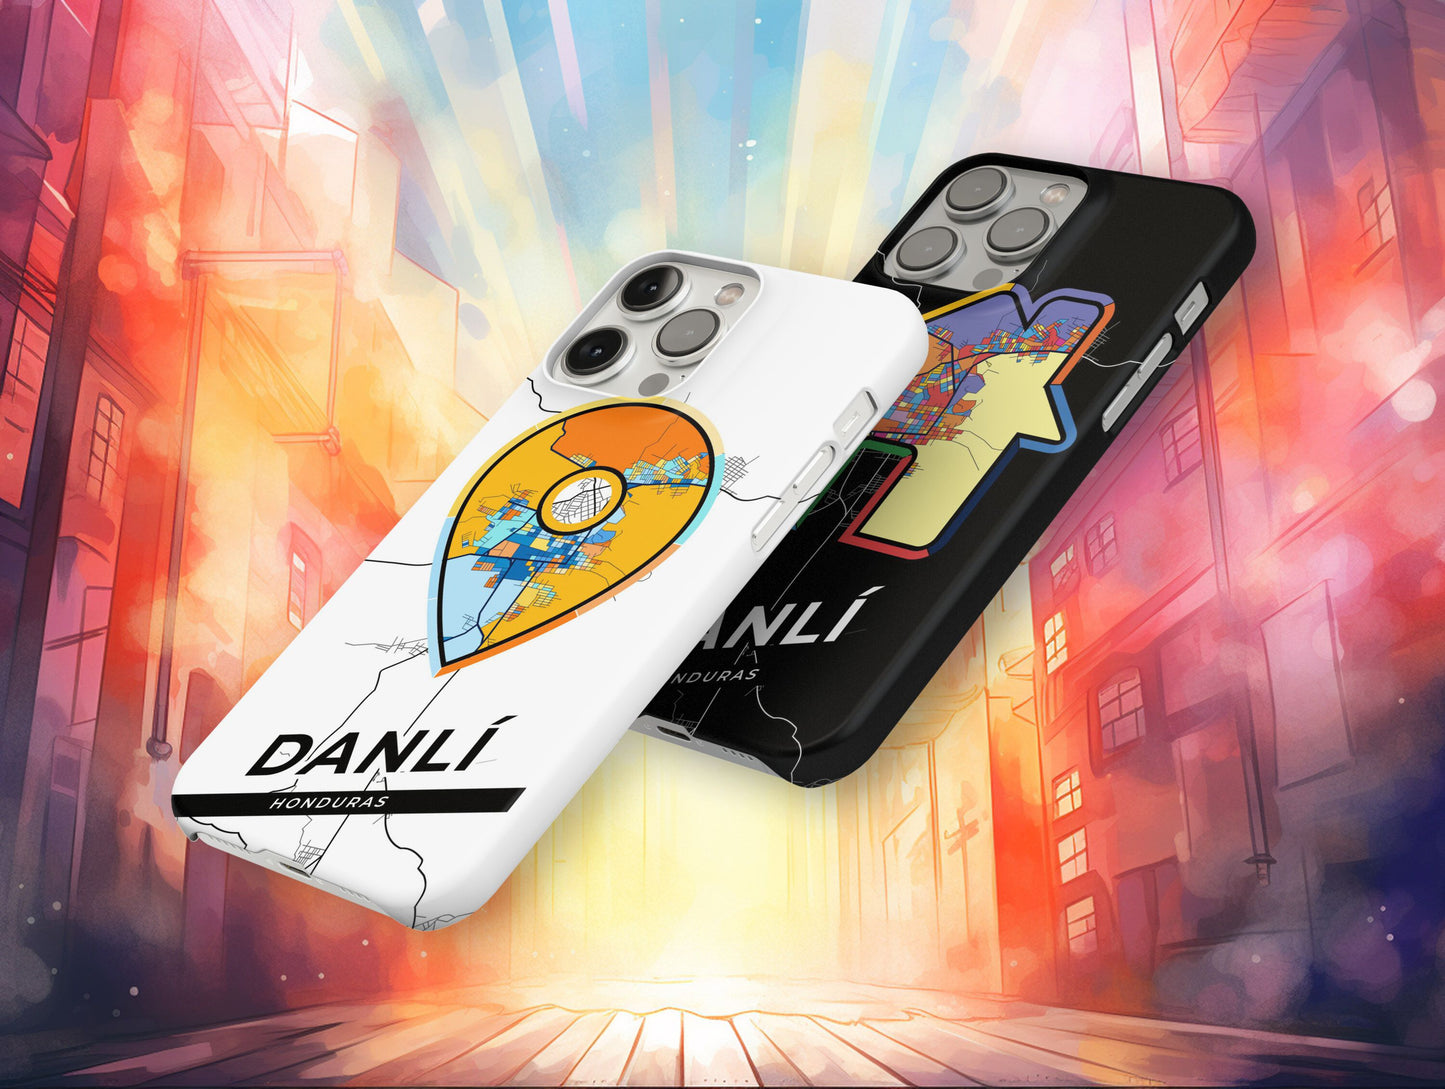 Danlí Honduras slim phone case with colorful icon. Birthday, wedding or housewarming gift. Couple match cases.